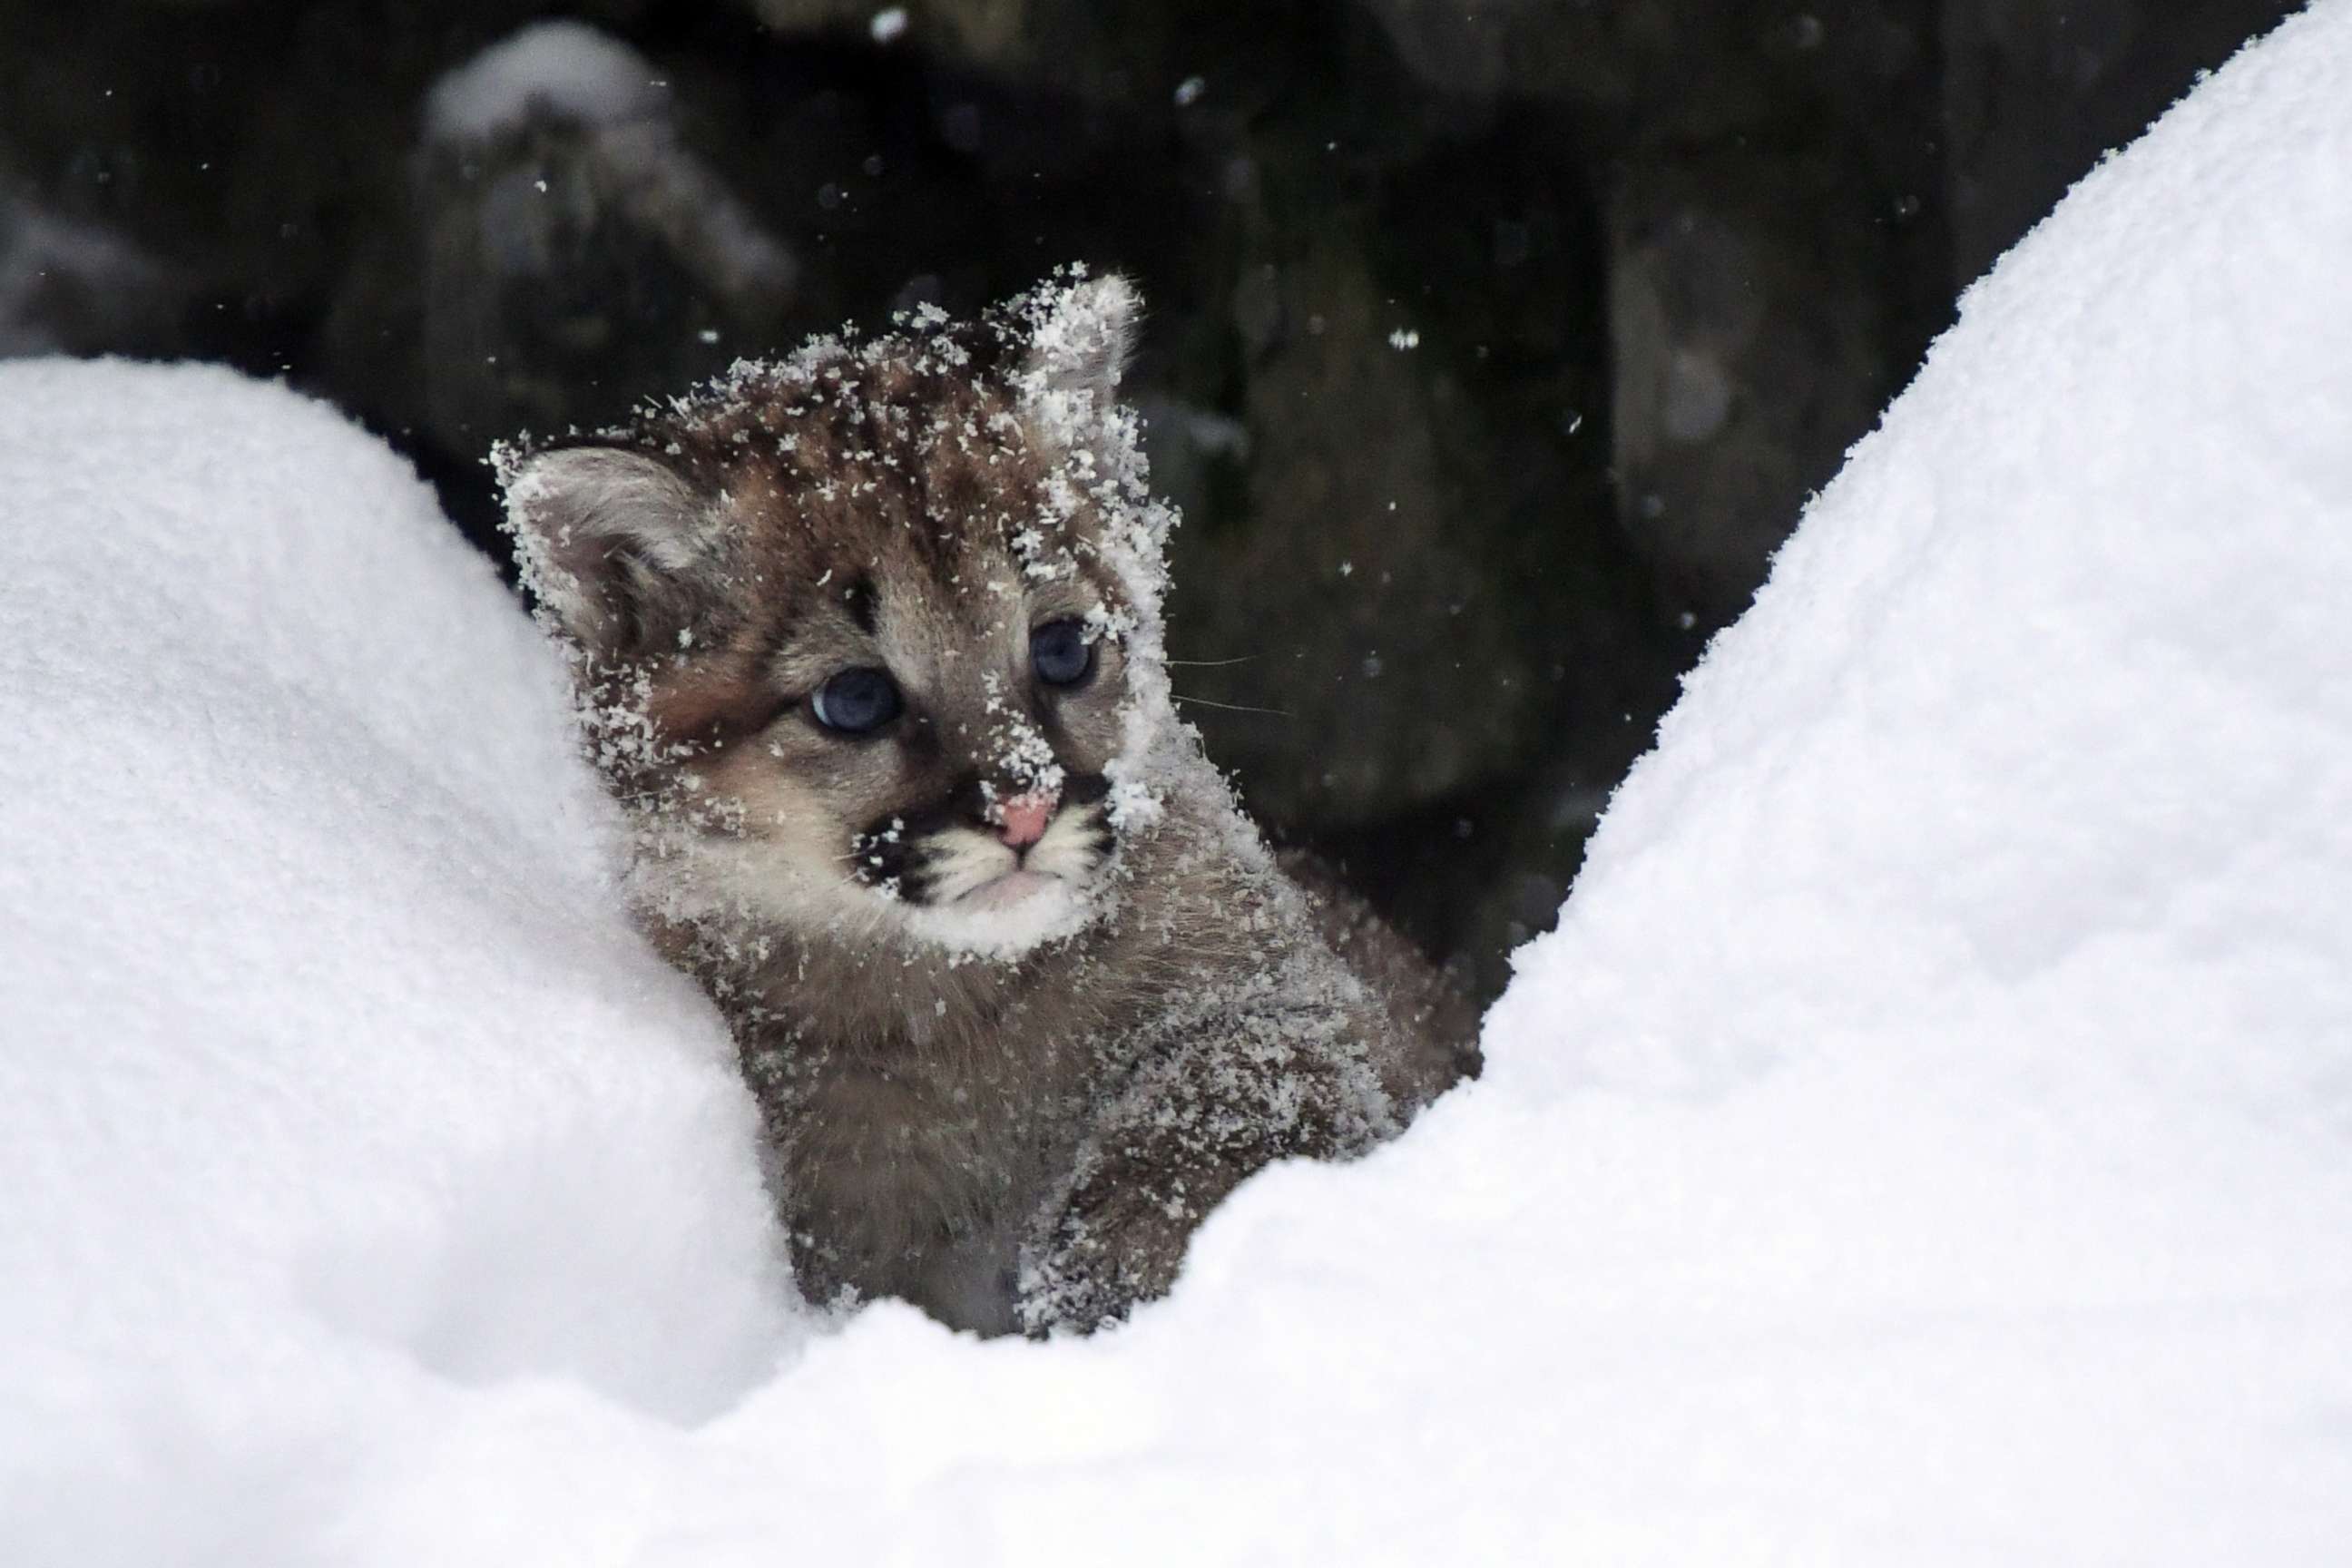 PHOTO: A newborn lynx kitten peers into the snow at the Novosibirsk Zoo in Siberia, Russia, Jan. 16, 2018.